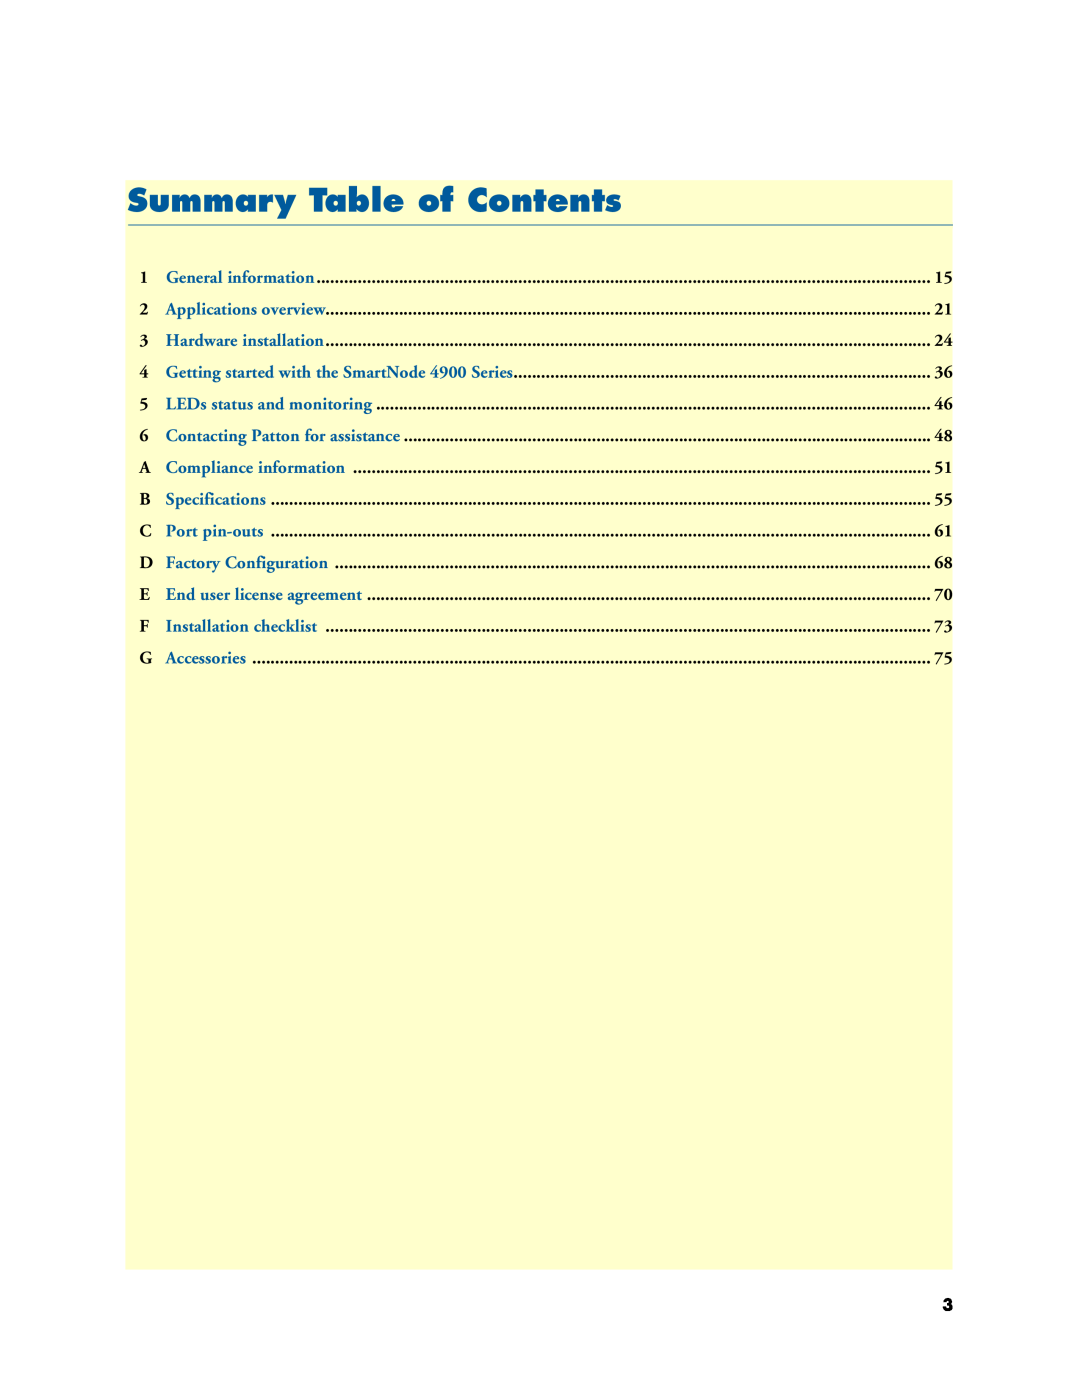 Patton electronic 4900 user manual Summary Table of Contents 